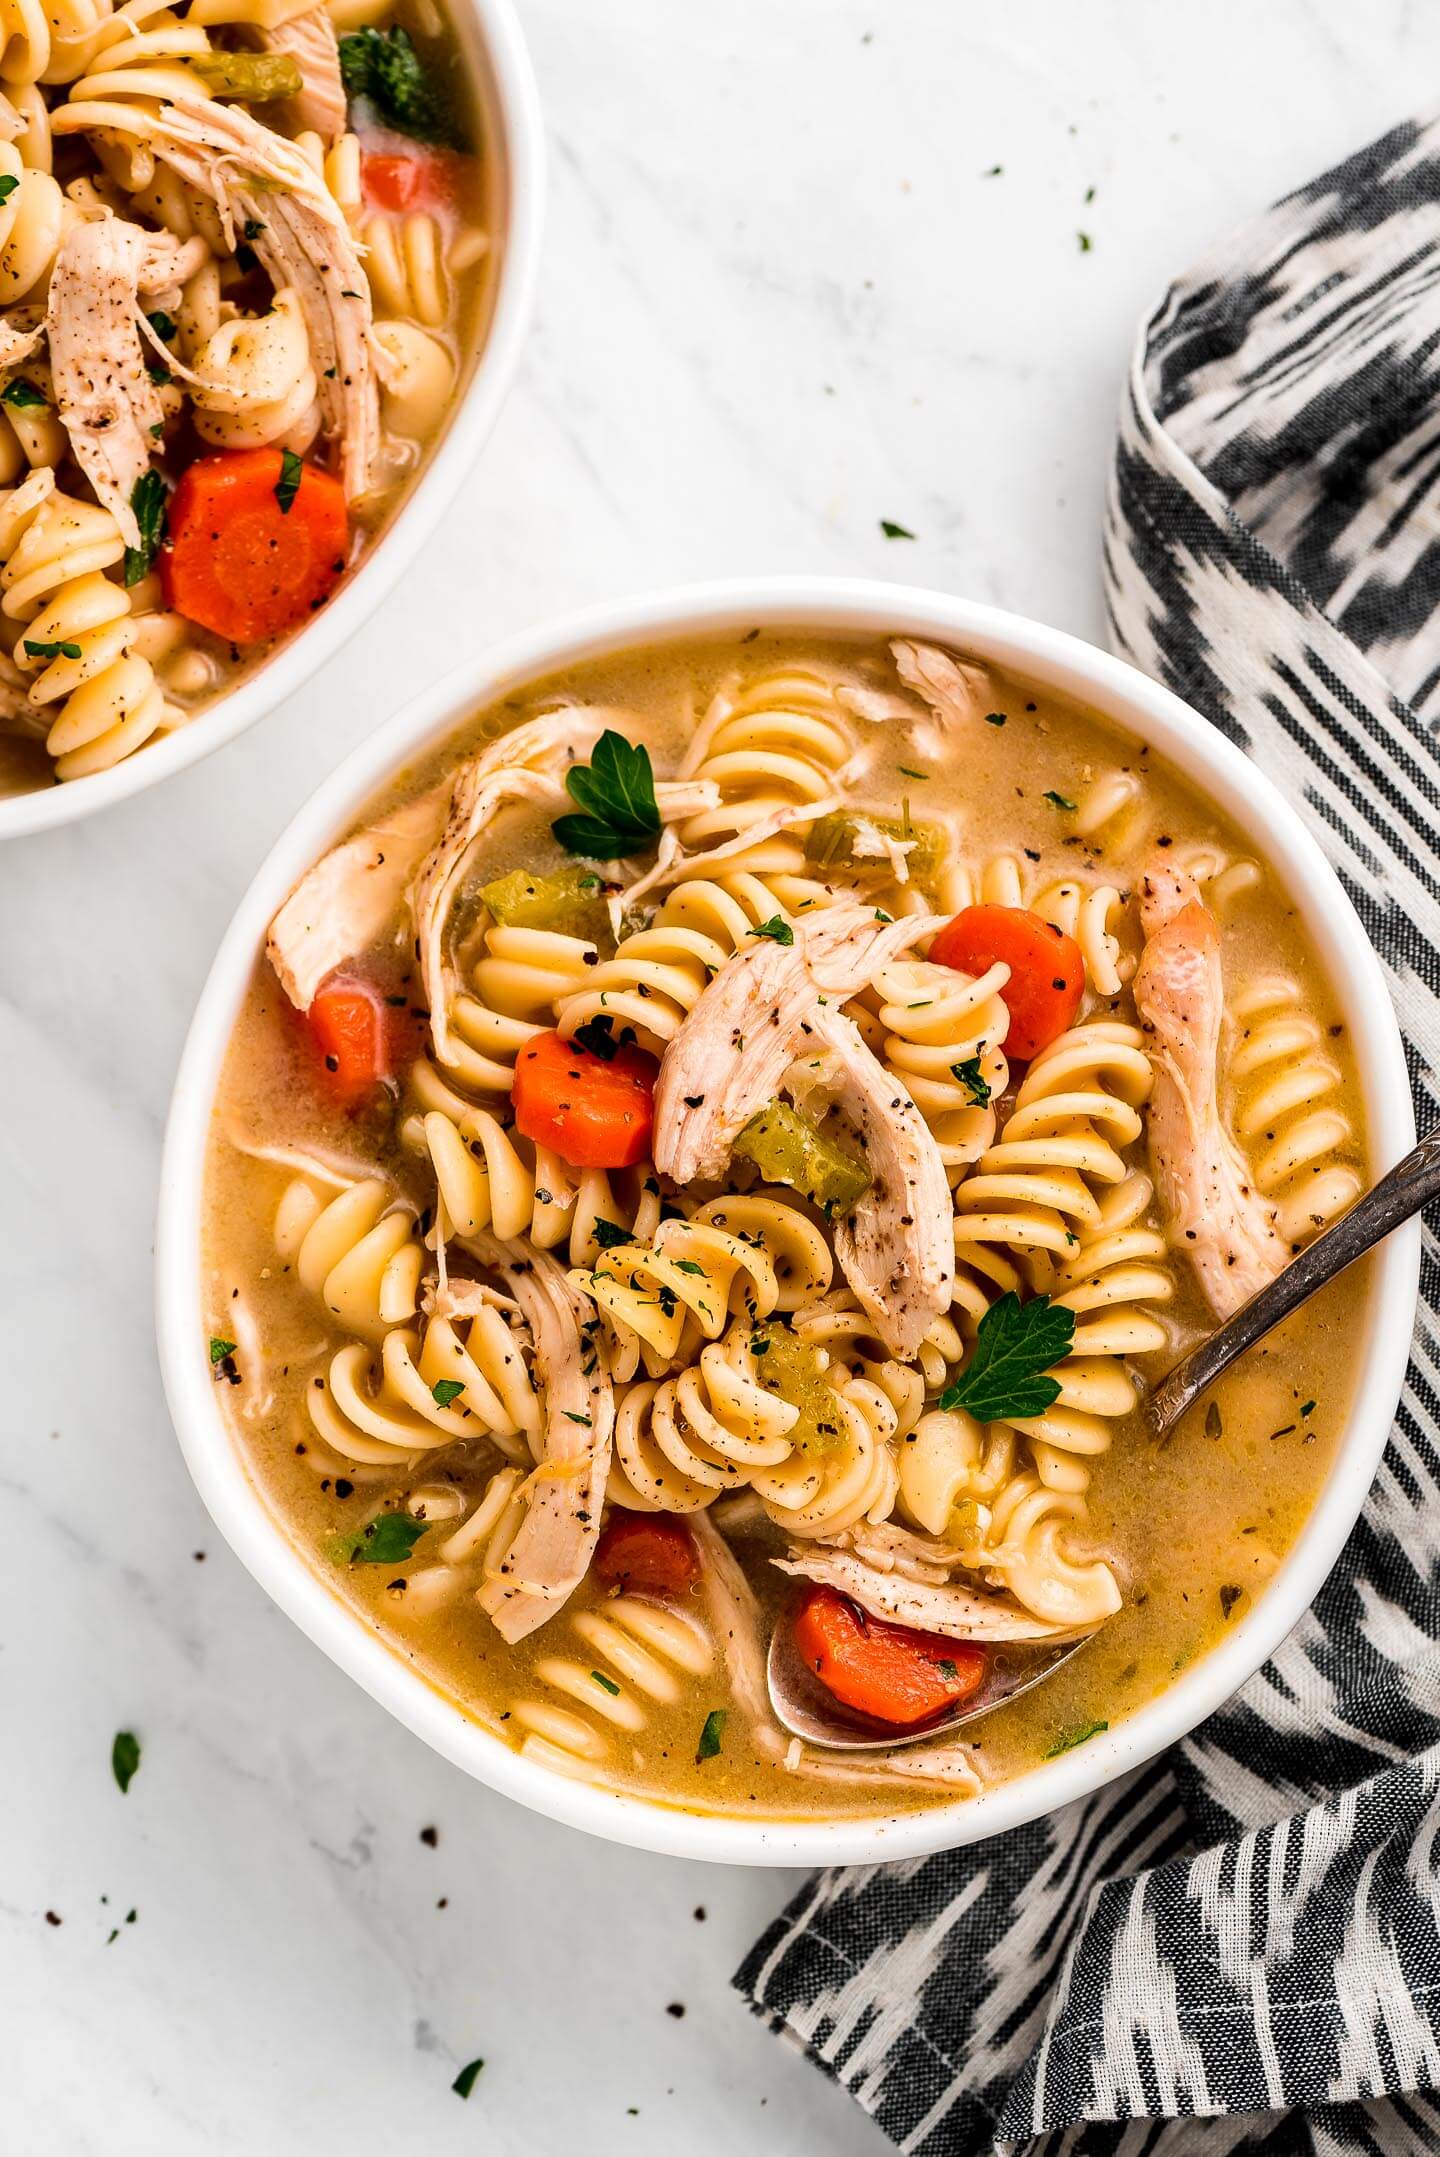 A large bowl of Rotisserie Chicken Noodle Soup with rotini noodles, shredded chicken, carrots, and parsley.